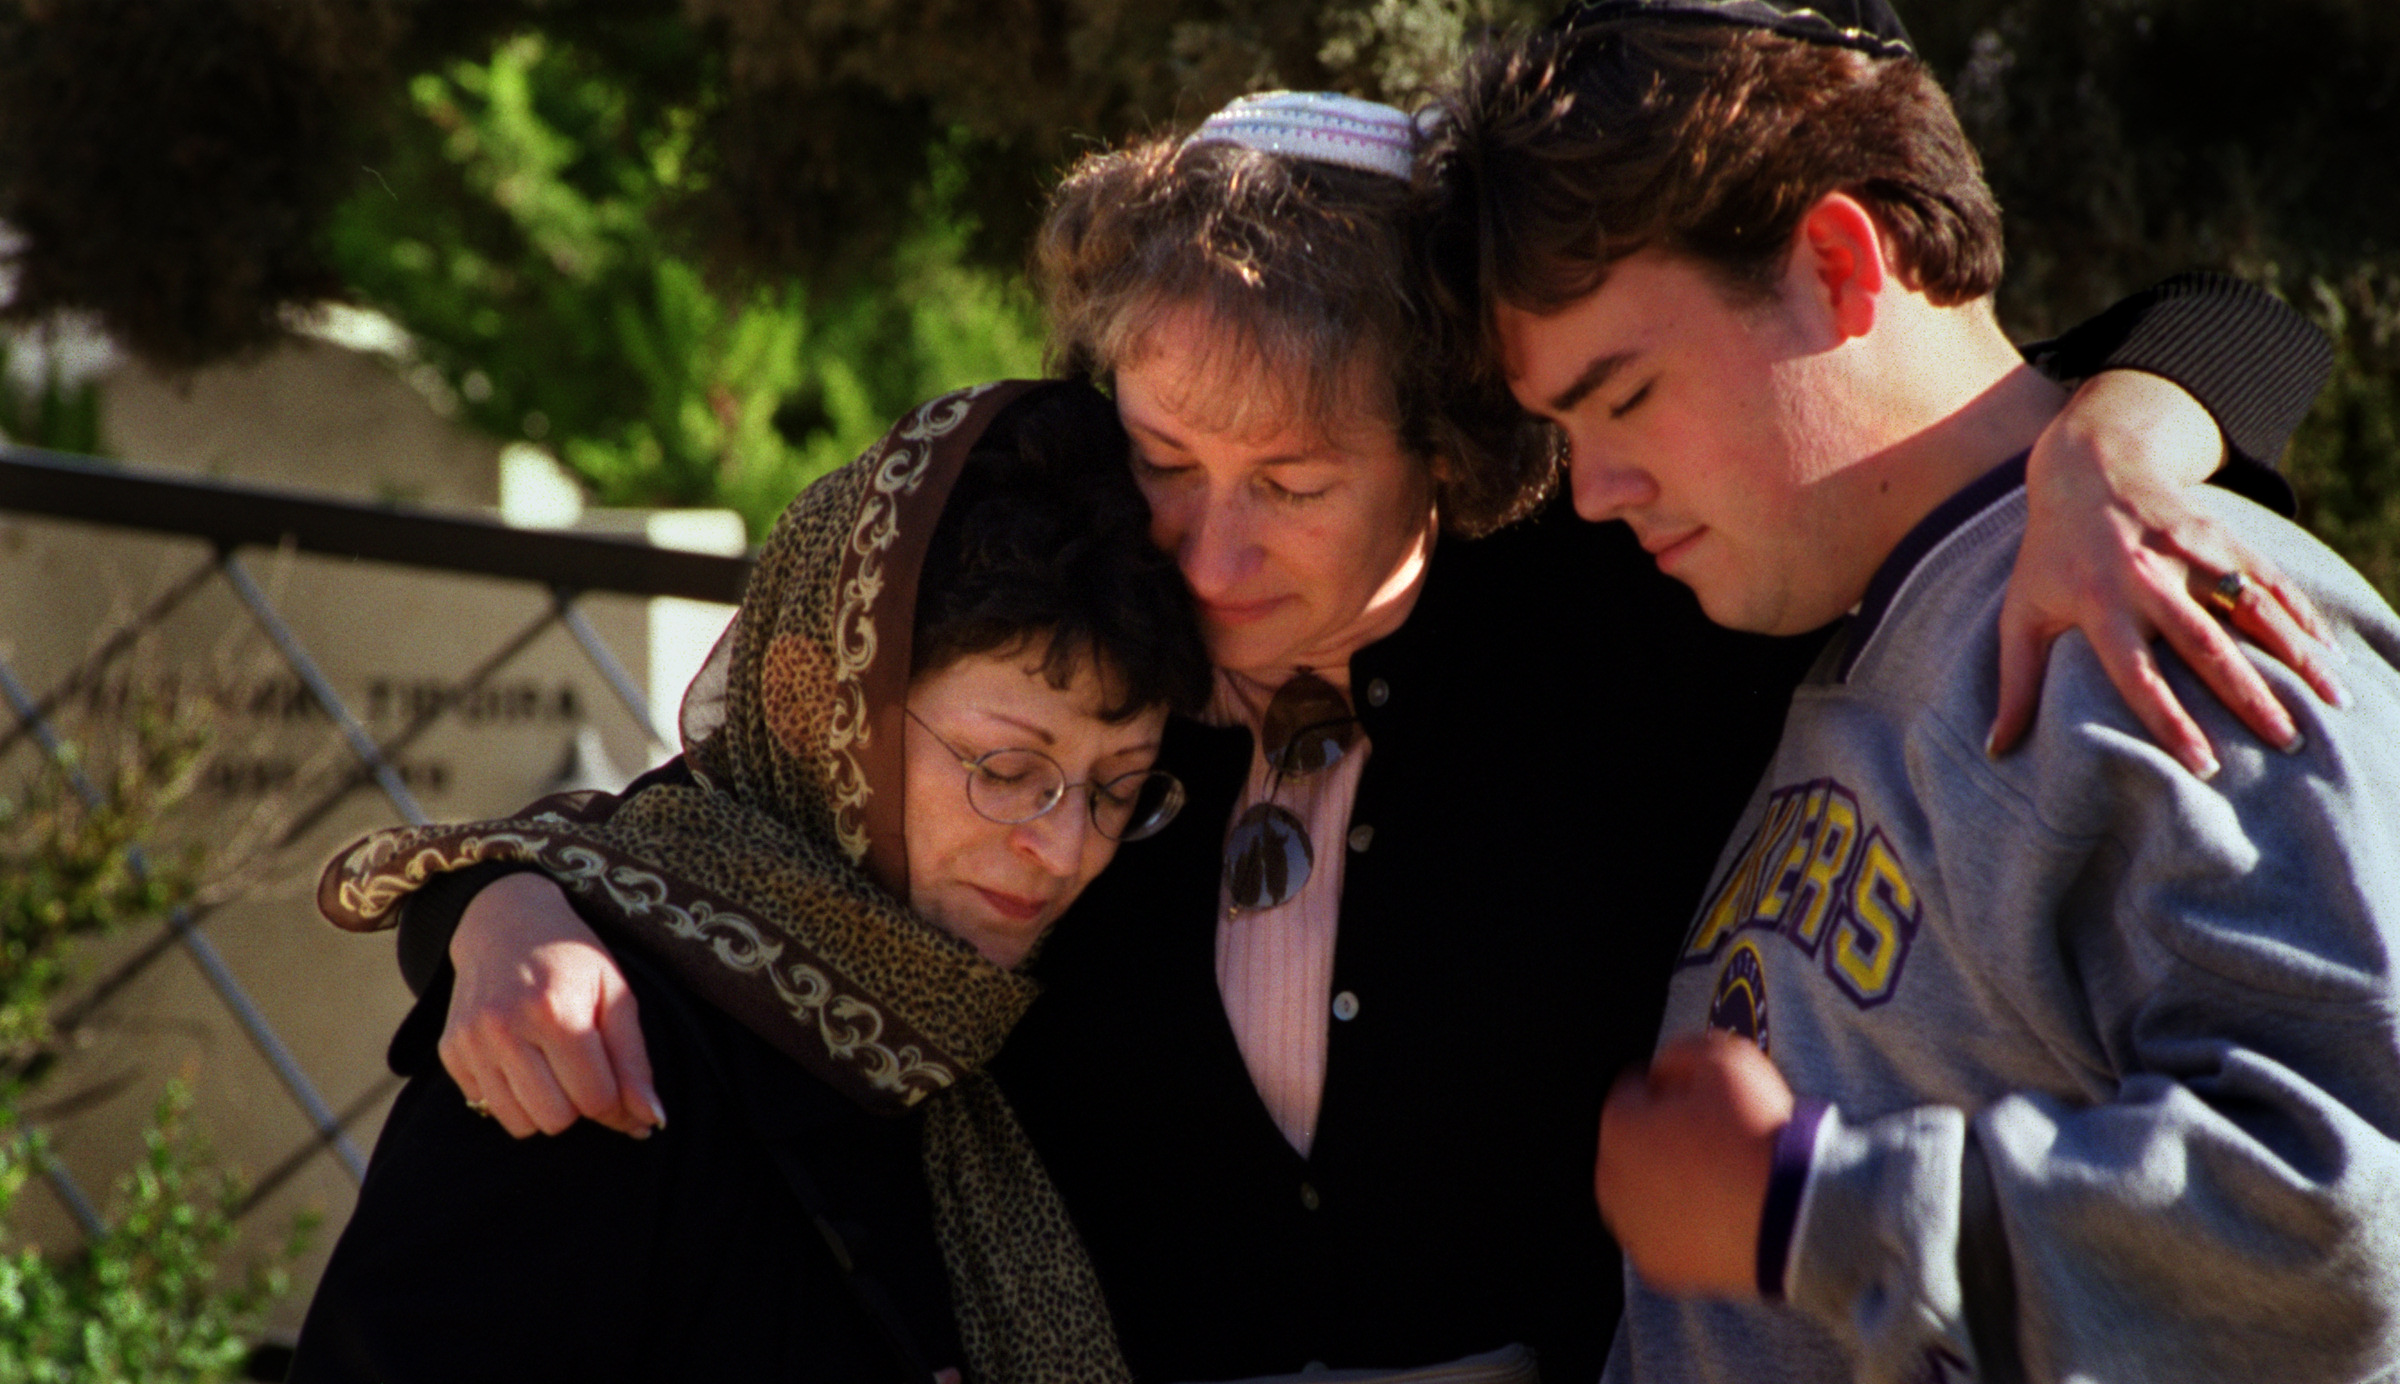  Left, Susan Smith, Barbara King, and Andrew Albers mourn atcemetery in Zefat where several children of Ma'Alot were buried after they lost their lives in a terrorist bombing during the conflict. Twenty-five years earlier Rabi Bernard King visited th